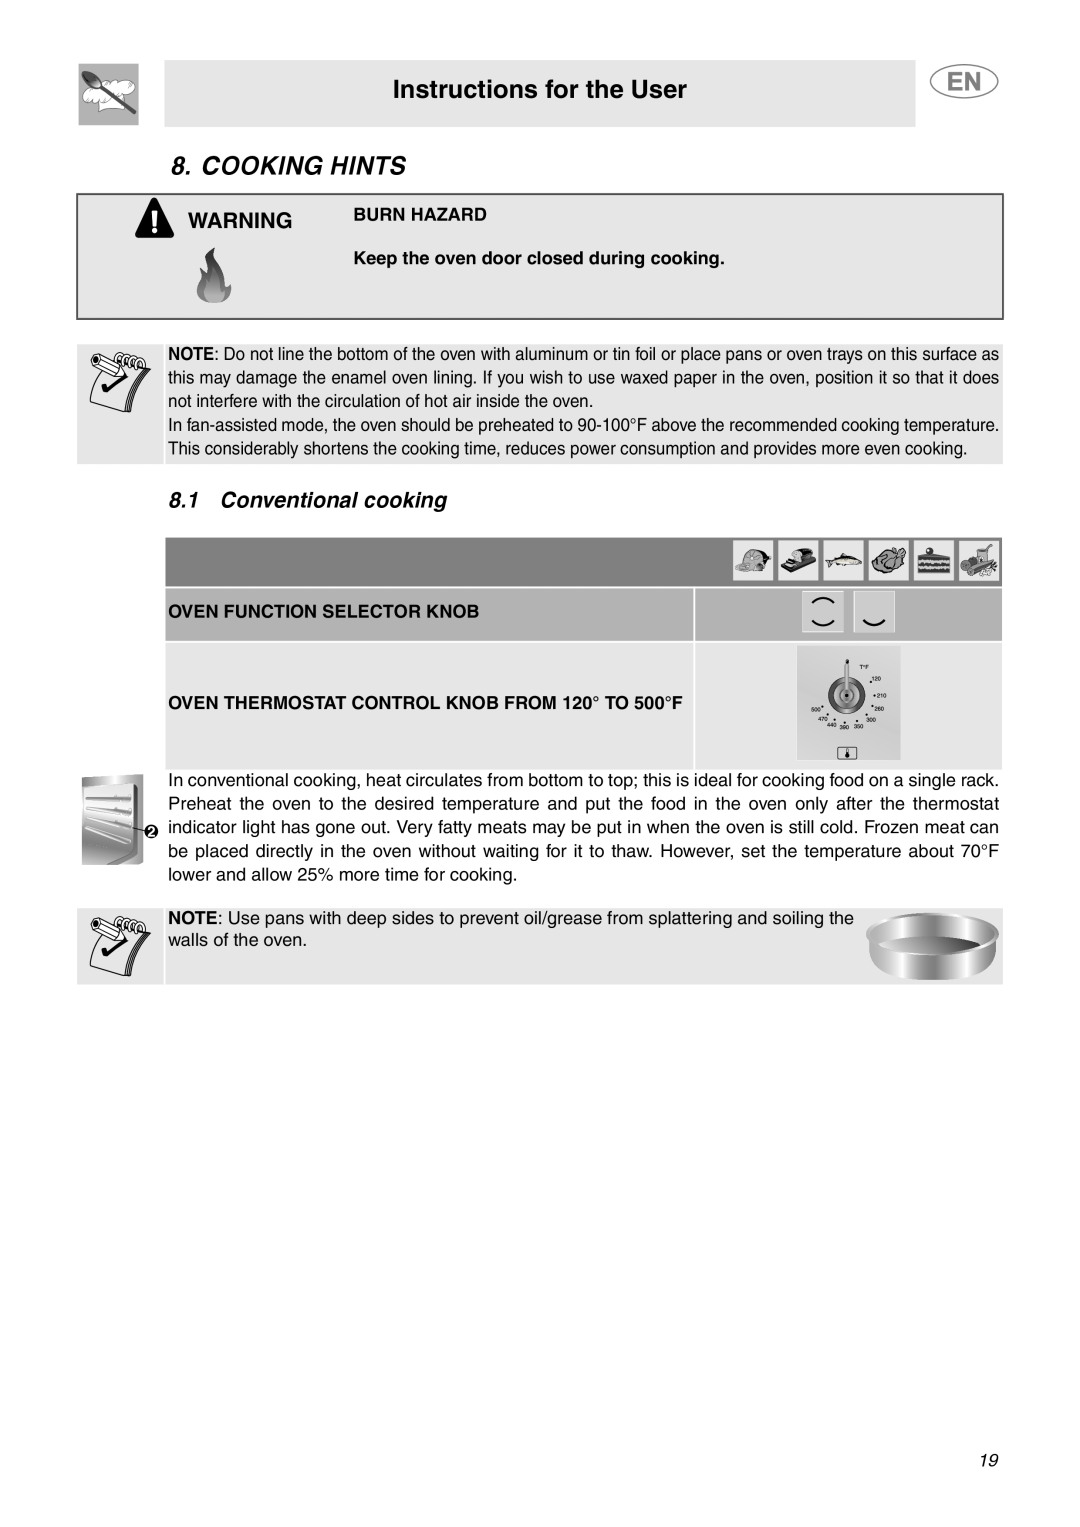 Smeg C9GMXU Cooking Hints, Conventional cooking, Instructions for the User, Burn Hazard, Oven Function Selector Knob 